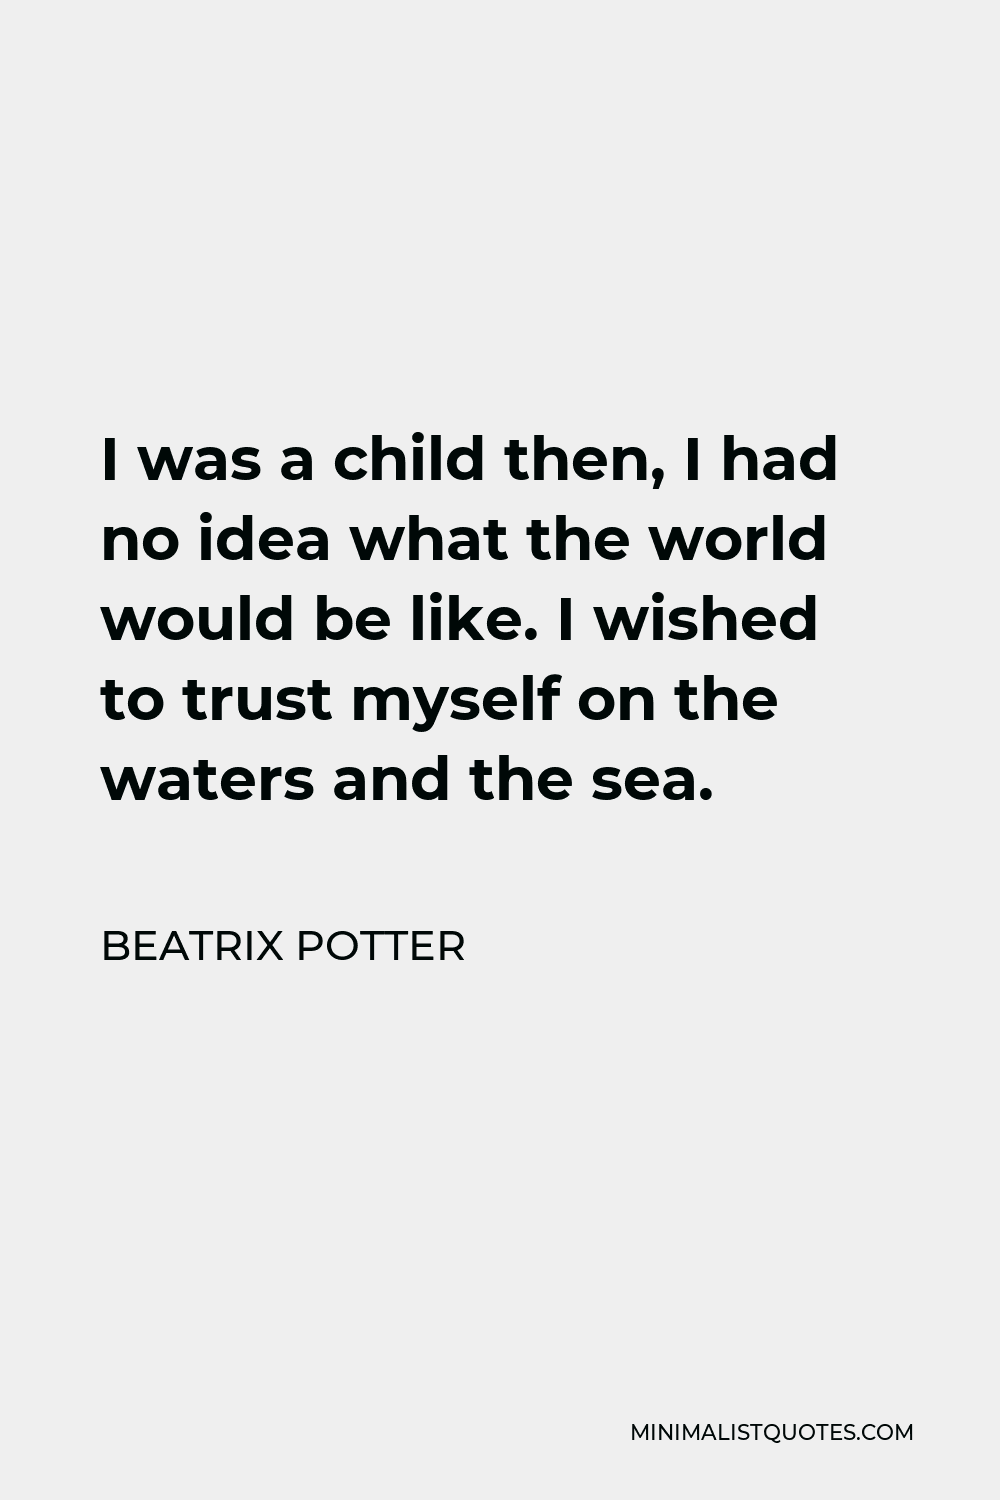 Beatrix Potter Quote - I was a child then, I had no idea what the world would be like. I wished to trust myself on the waters and the sea.